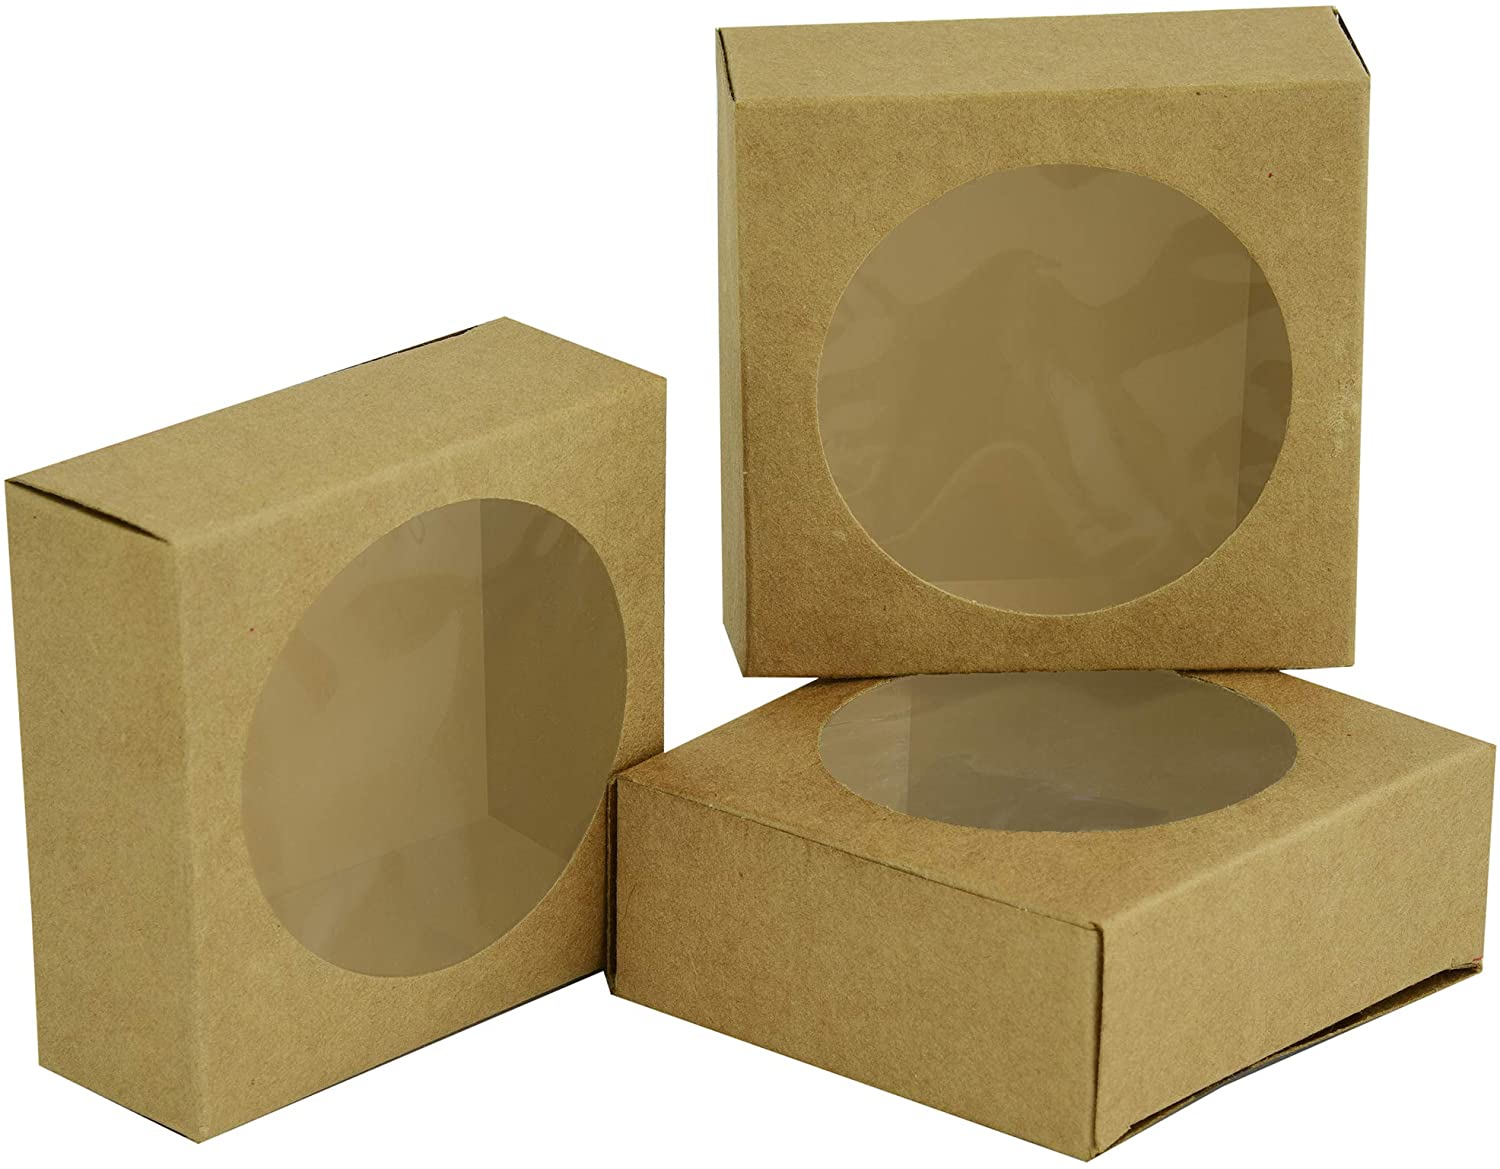 24 Pc Pack Brown Kraft Paper Boxes with Round Clear Window for Gift Wrapping, Party, Treats and giveaways .100% recycled material. - Willow